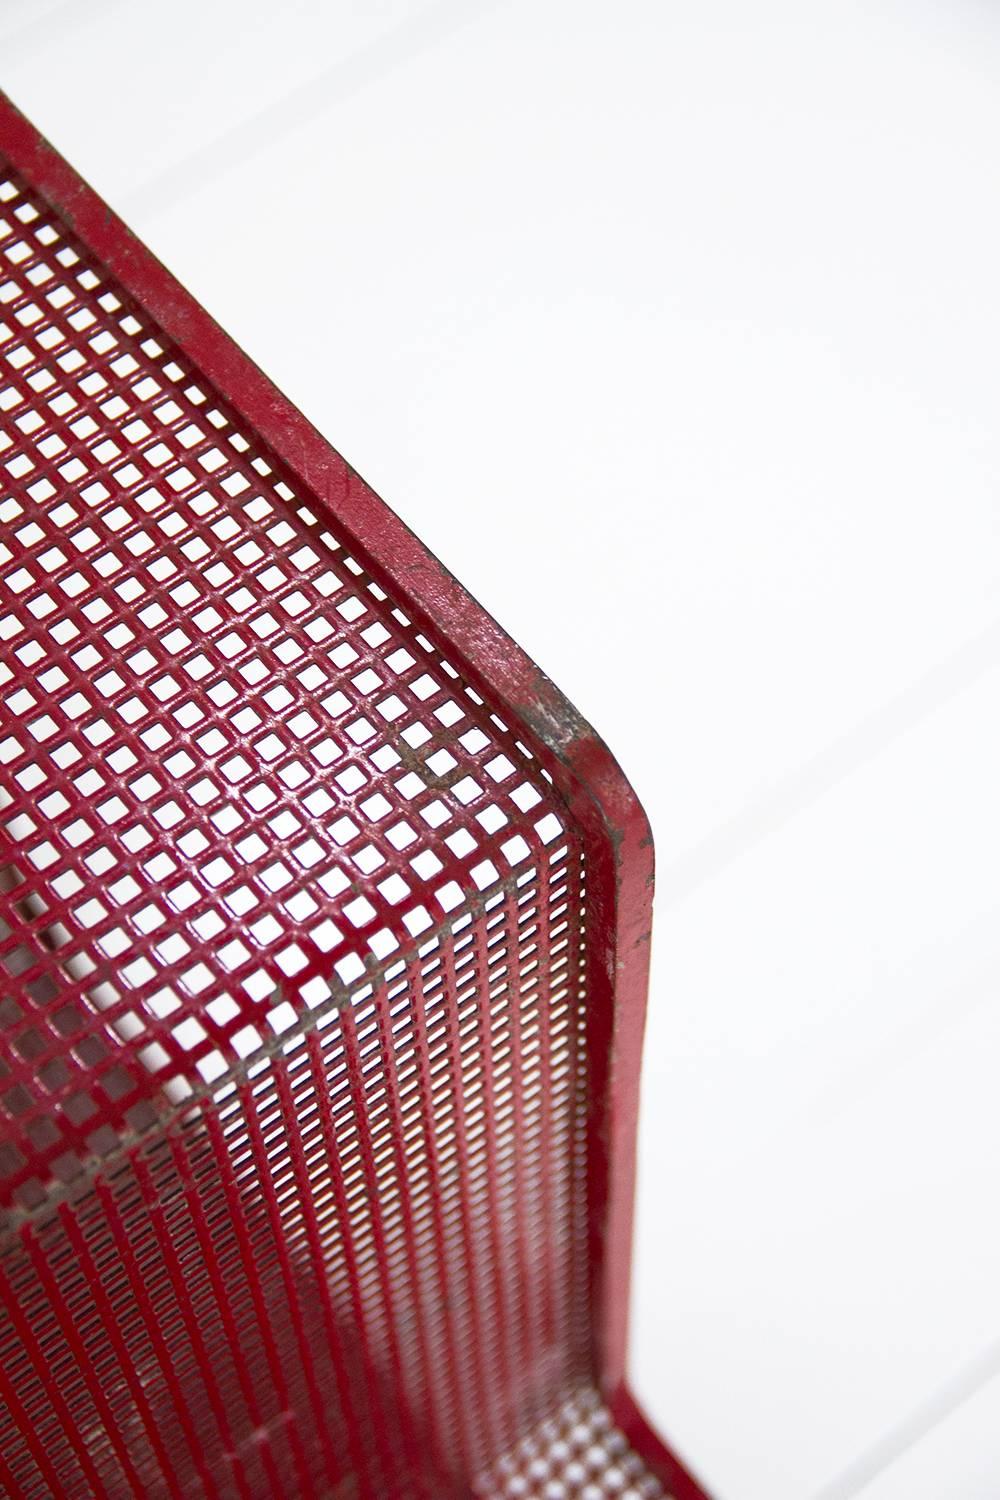 Mid-20th Century Red Dedal Wall Shelf by Mathieu Matégot, Perforated Steel, circa 1950, France For Sale